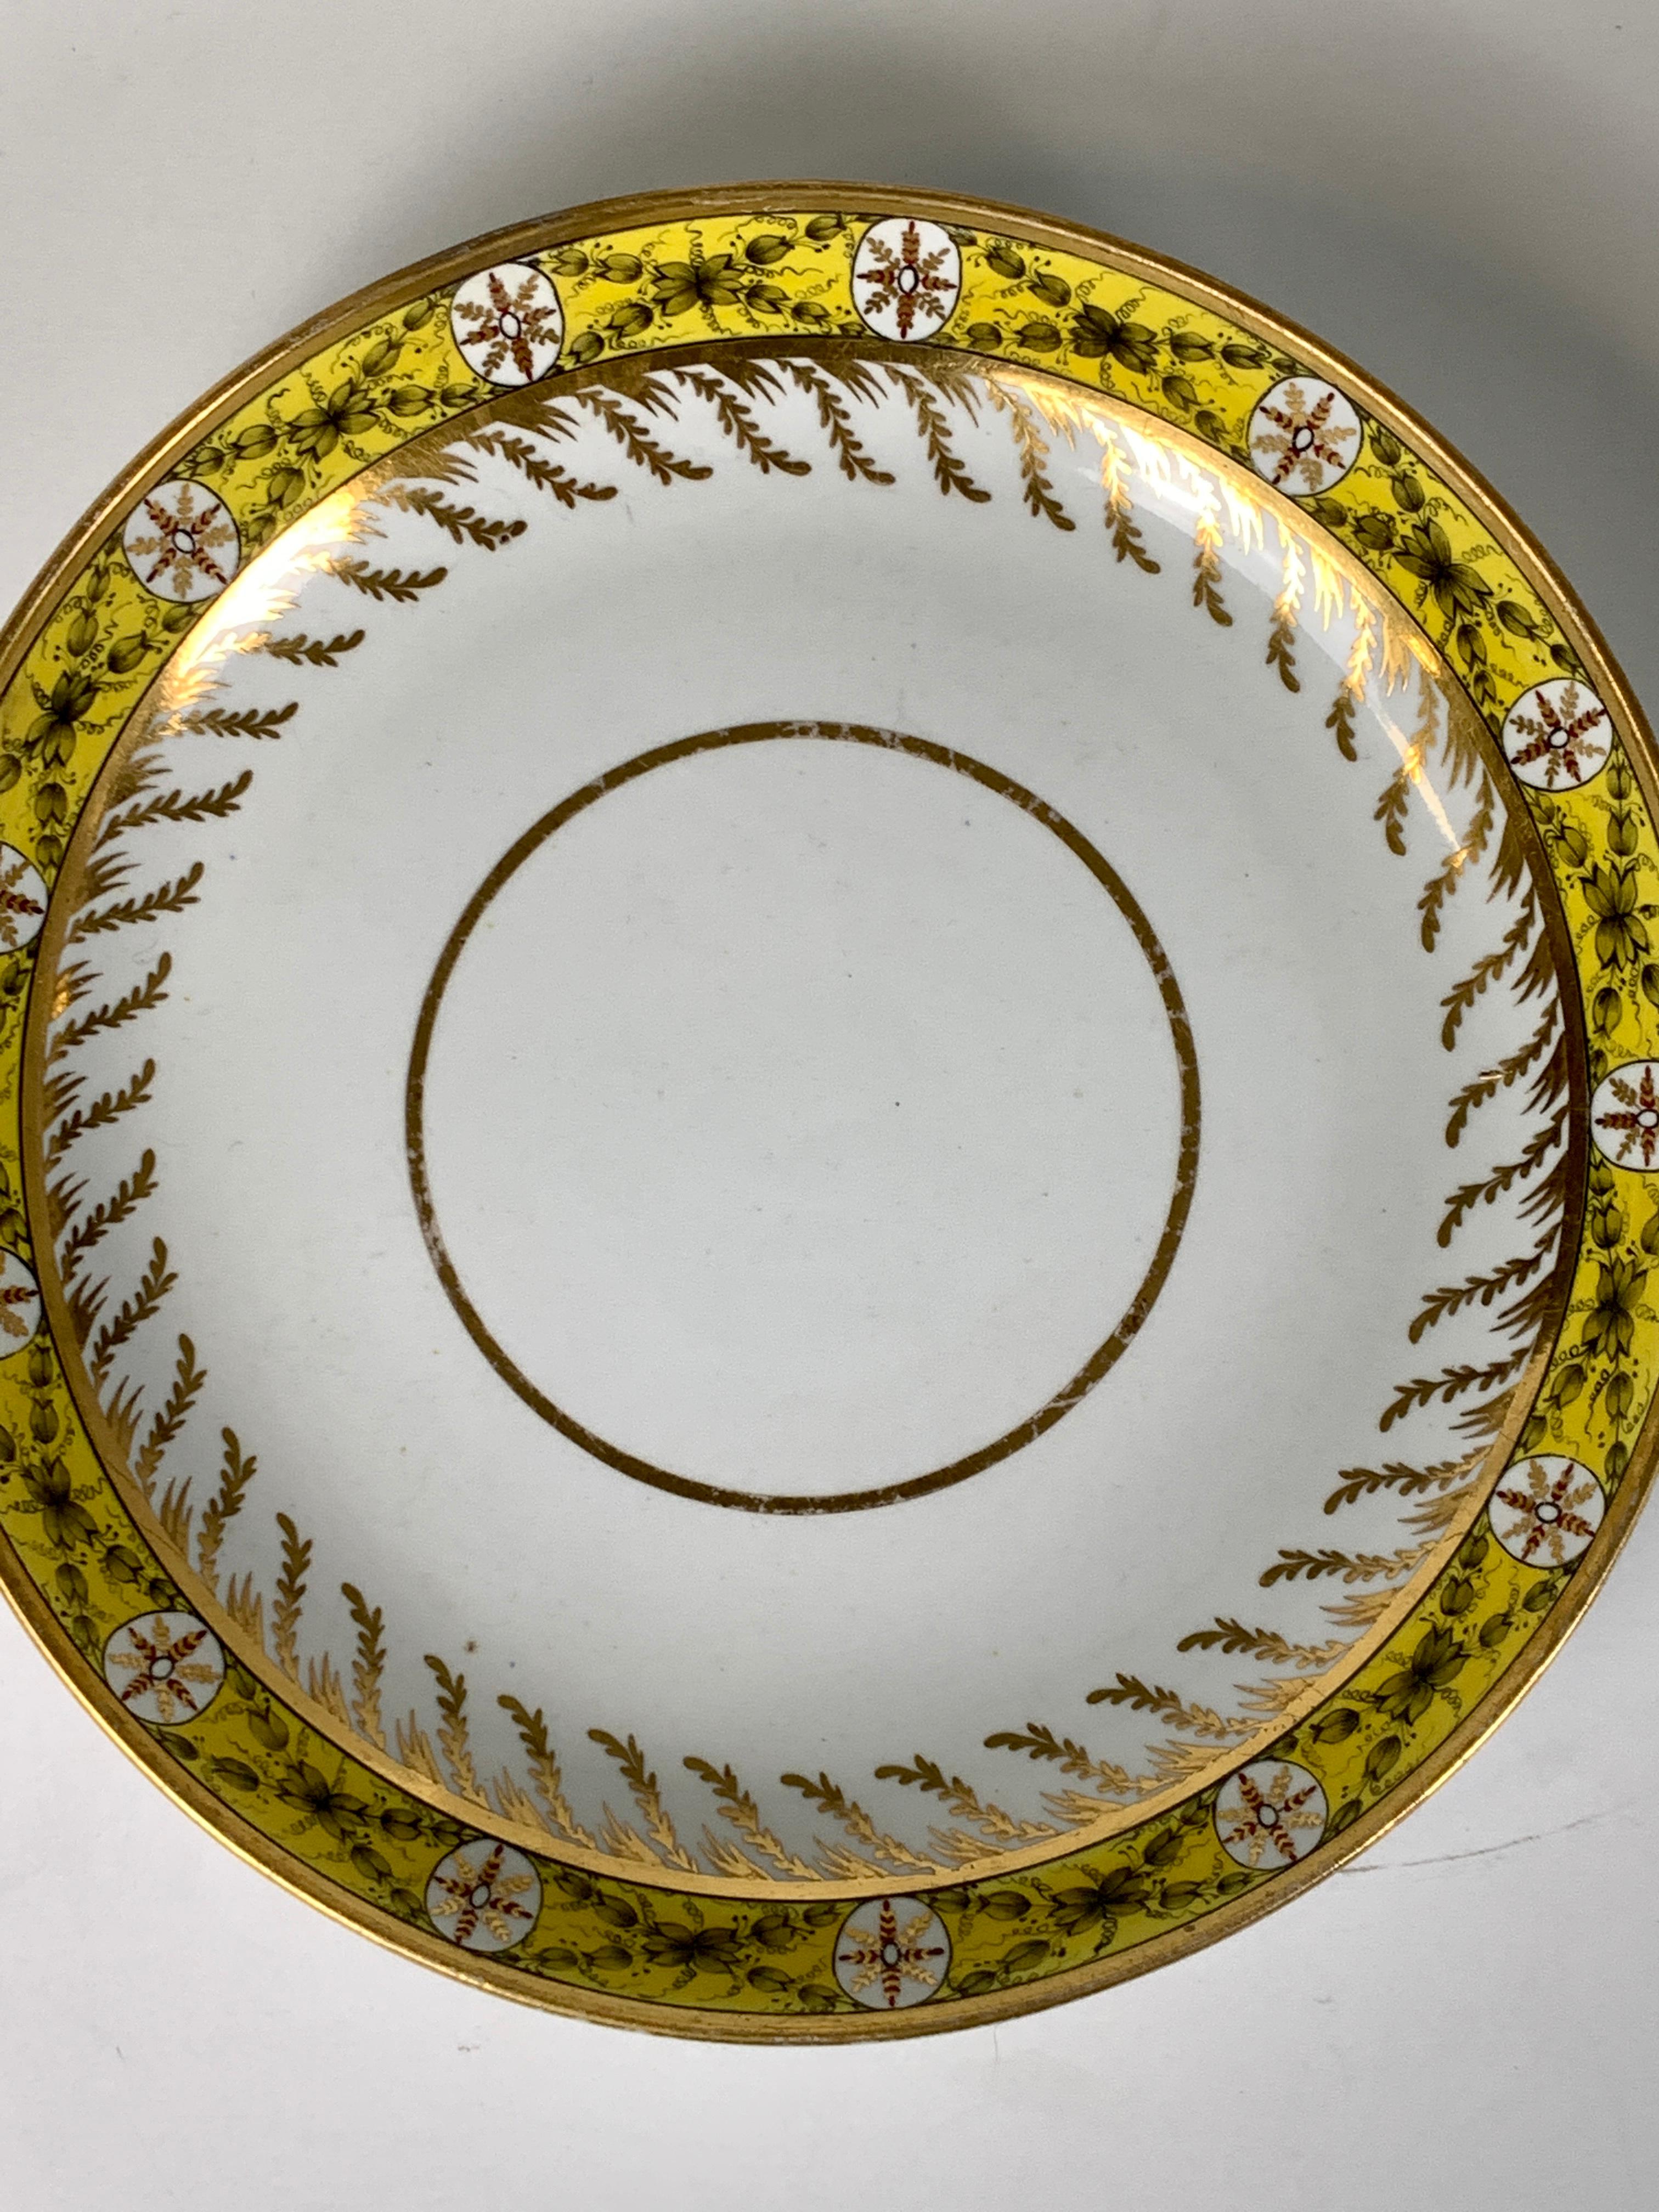 Yellow English Porcelain Dish with Neoclassical Design Circa 1800 In Excellent Condition For Sale In Katonah, NY